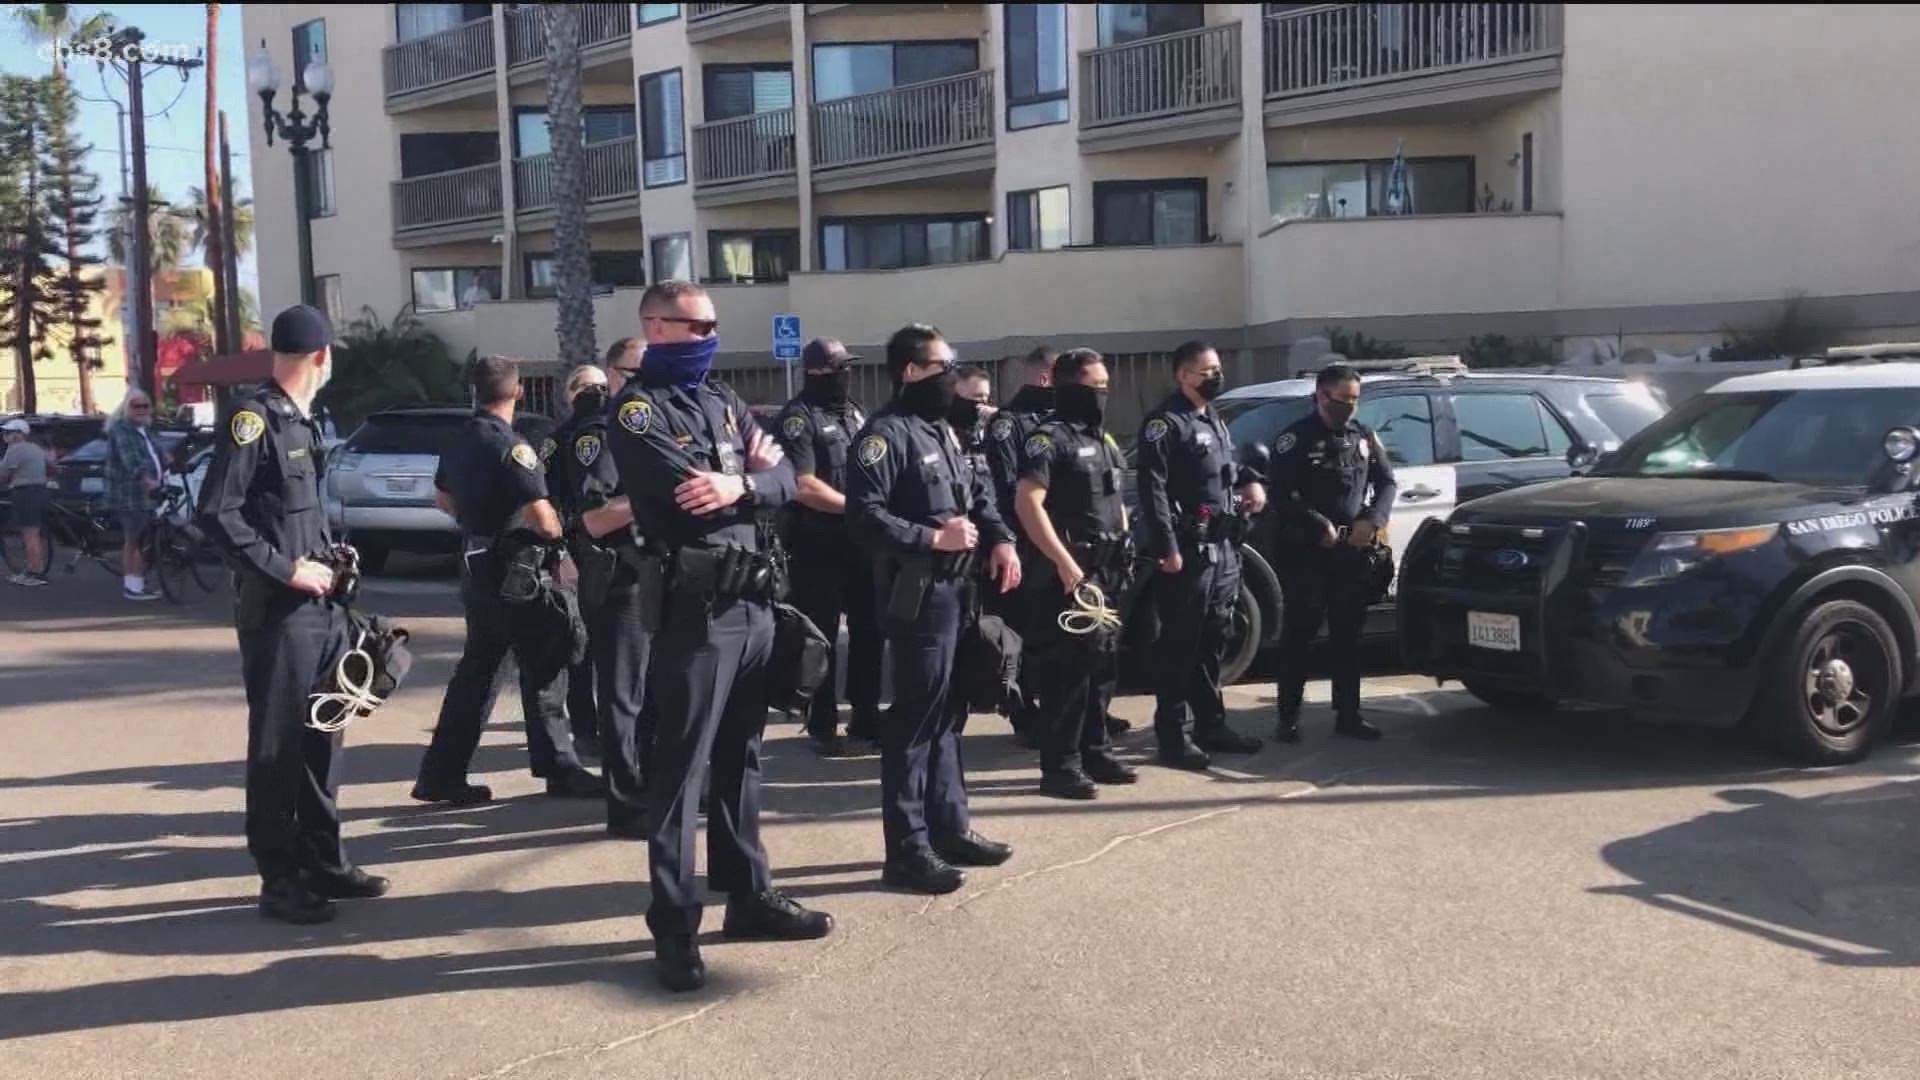 With growing concern over violent protests,  Gov. Gavin Newsom called for 1,000 National Guard troops to Sacramento. San Diego law enforcement says they are ready.